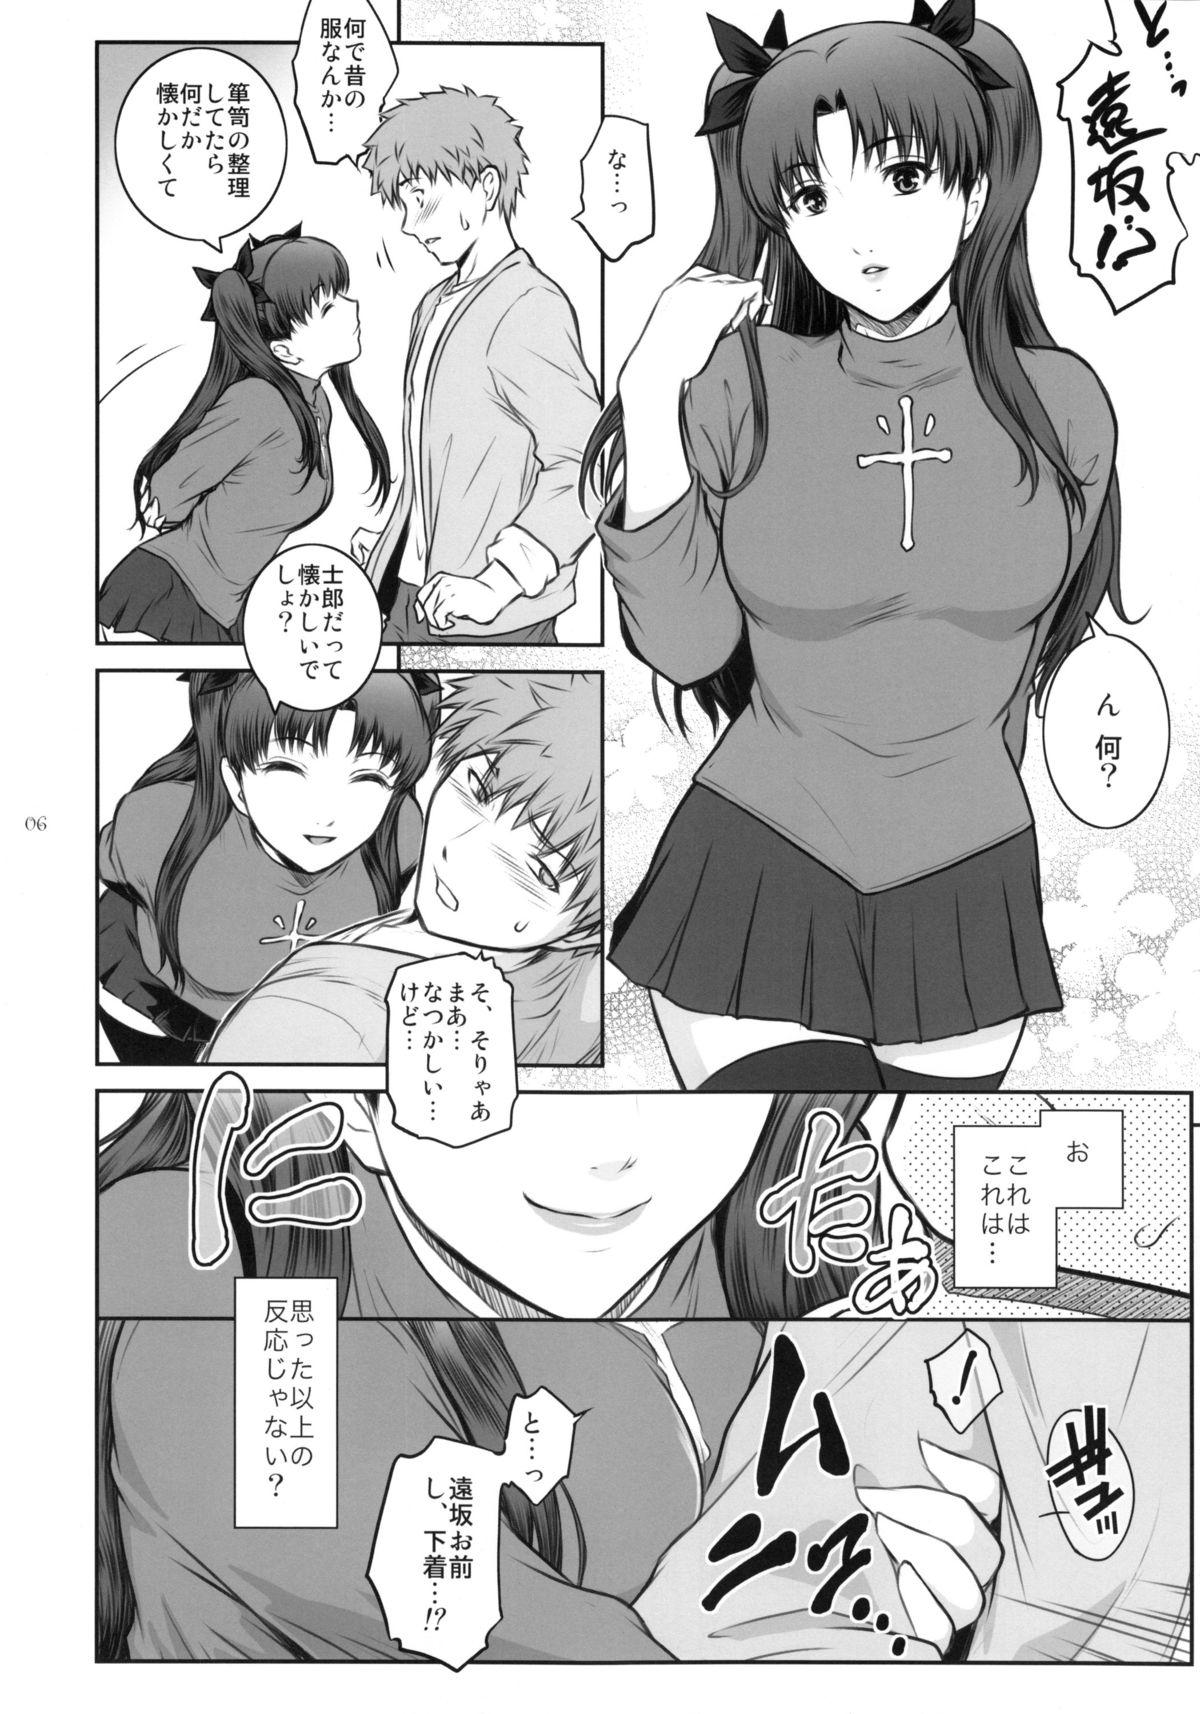 Argenta Unusual Bedtime Working - Fate stay night Hymen - Page 6